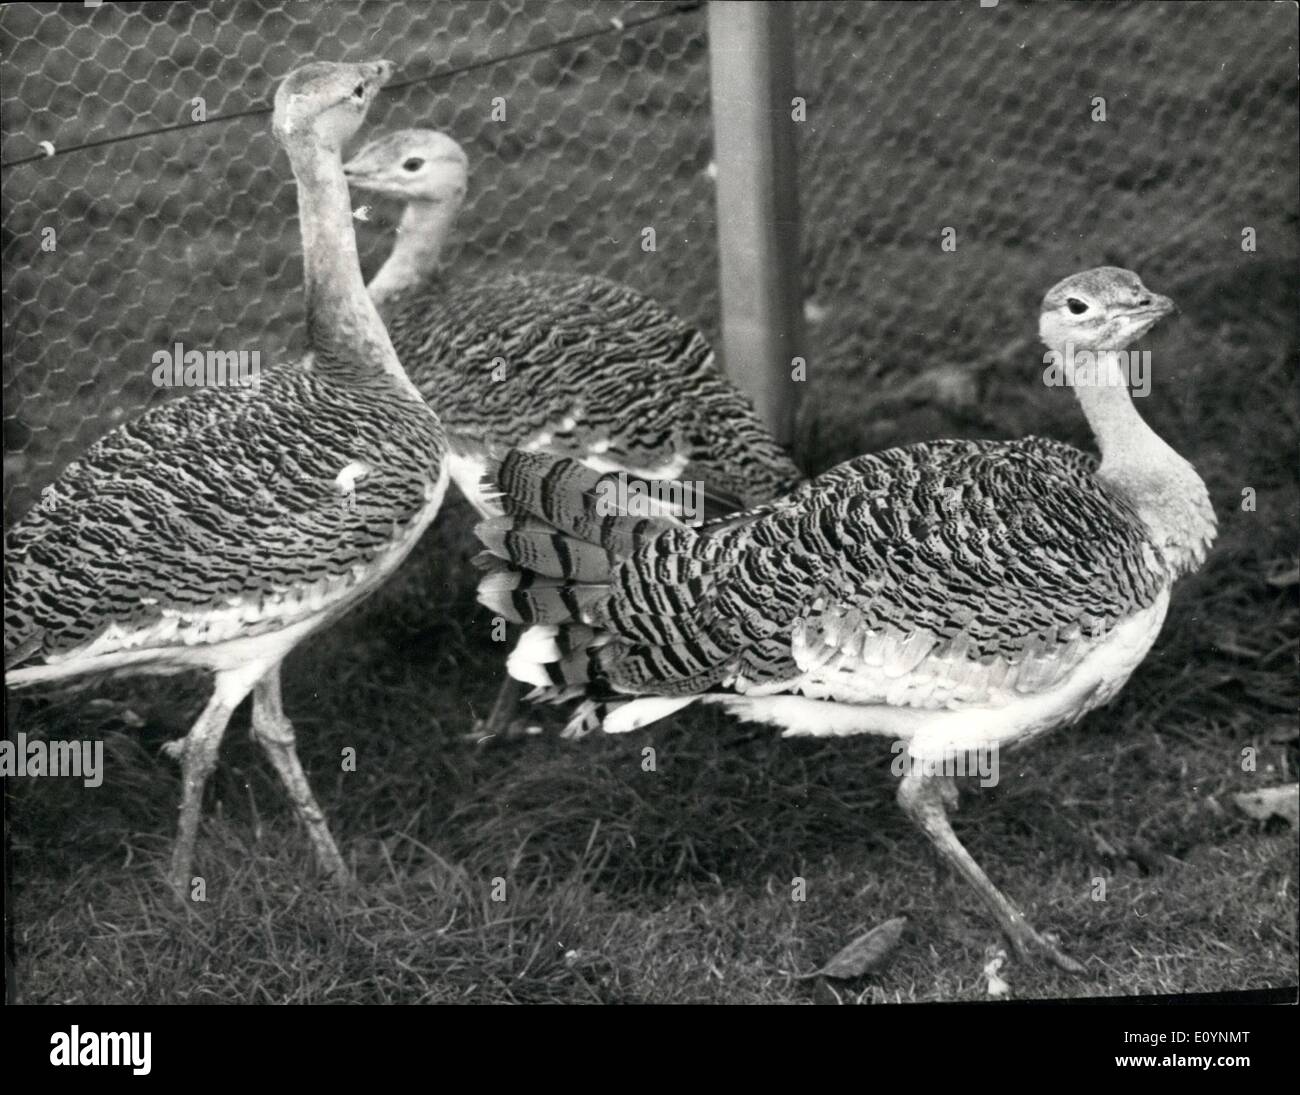 Dec. 12, 1970 - Great bustard returns after 150 years. The great bustard, a bird an large as a Turkey and one of the retest in Europe, is to be reintroduced into Britain as a breeding bird. Mr. Christopher Marler, who runs a private zoo at Weston Underwood, Bucks, has imported two male and four female great bustards from Portugal and the birds will be released on a leased 10-acre site on Salisbury plain in the spring. the site will be surrounded by an eight-foot wire fence, and it is hoped that the birds will nature and breed there withing three years Stock Photo